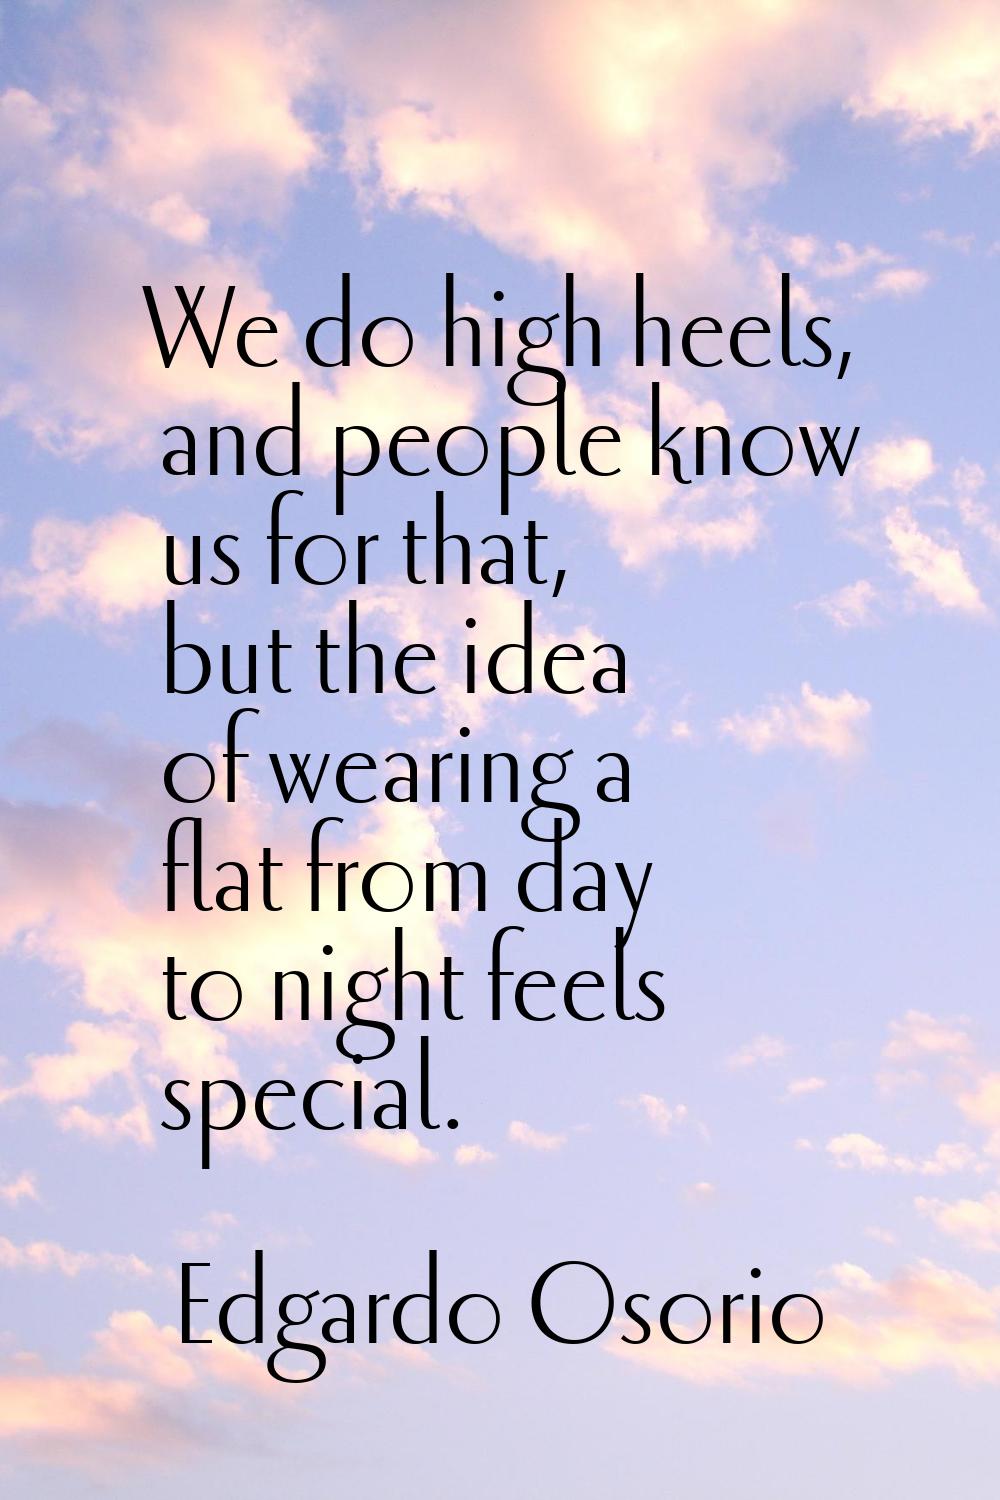 We do high heels, and people know us for that, but the idea of wearing a flat from day to night fee